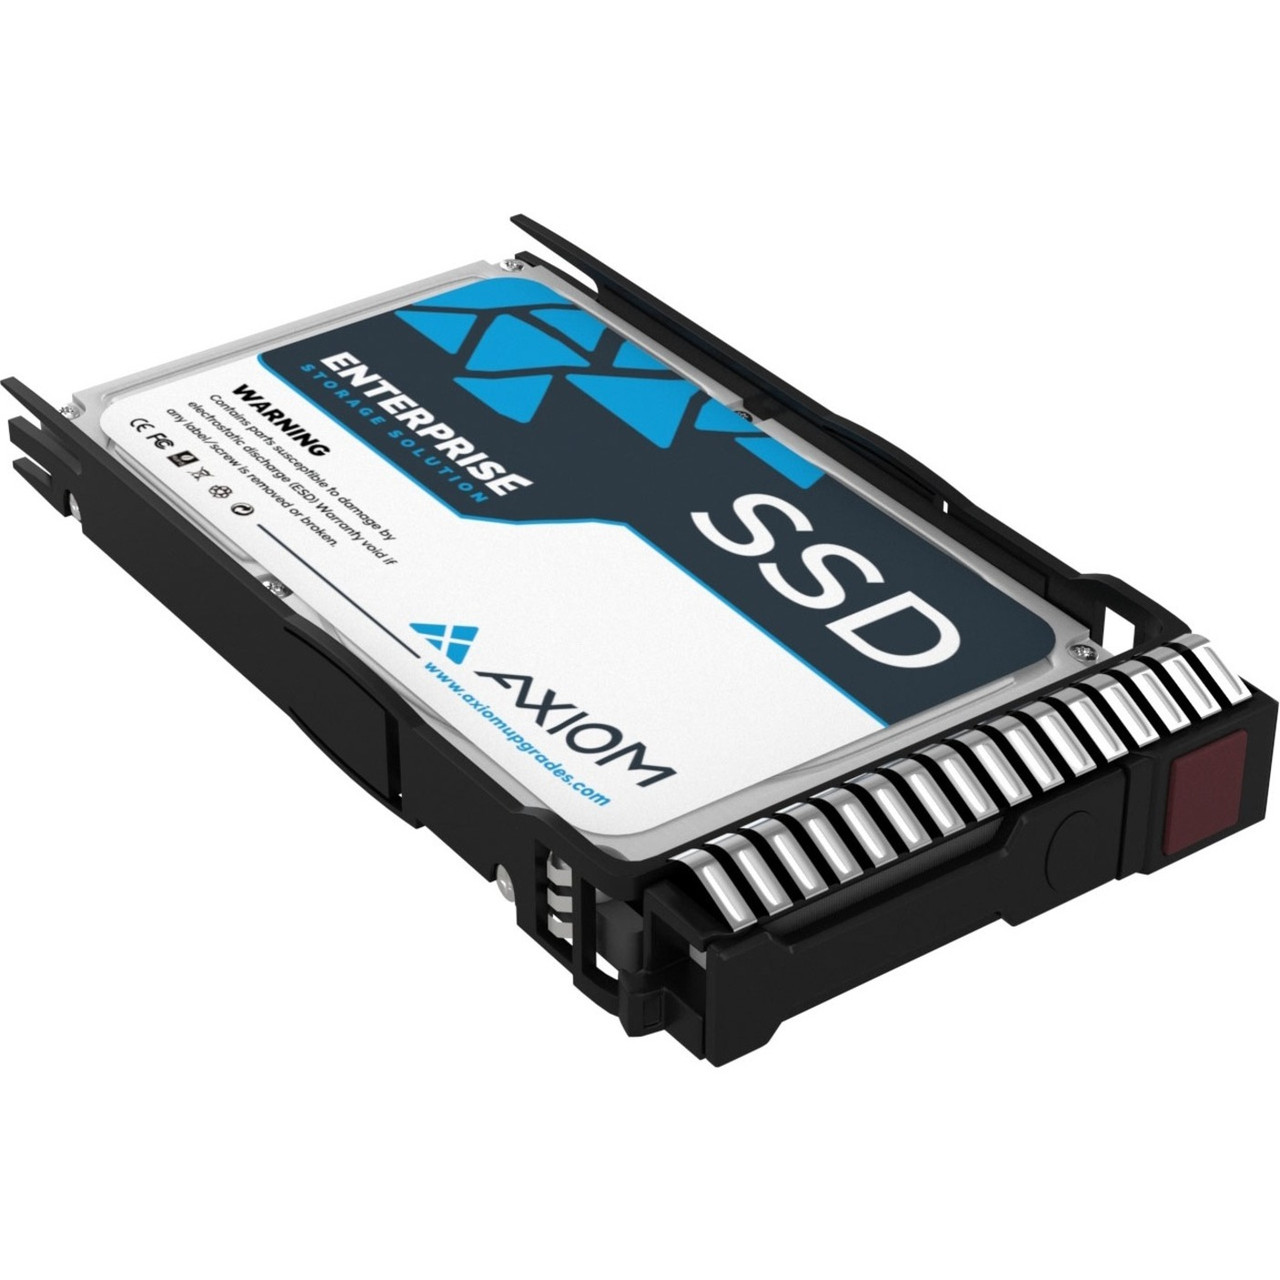 Axiom EP450 1.92 TB Solid State Drive - 2.5" Internal